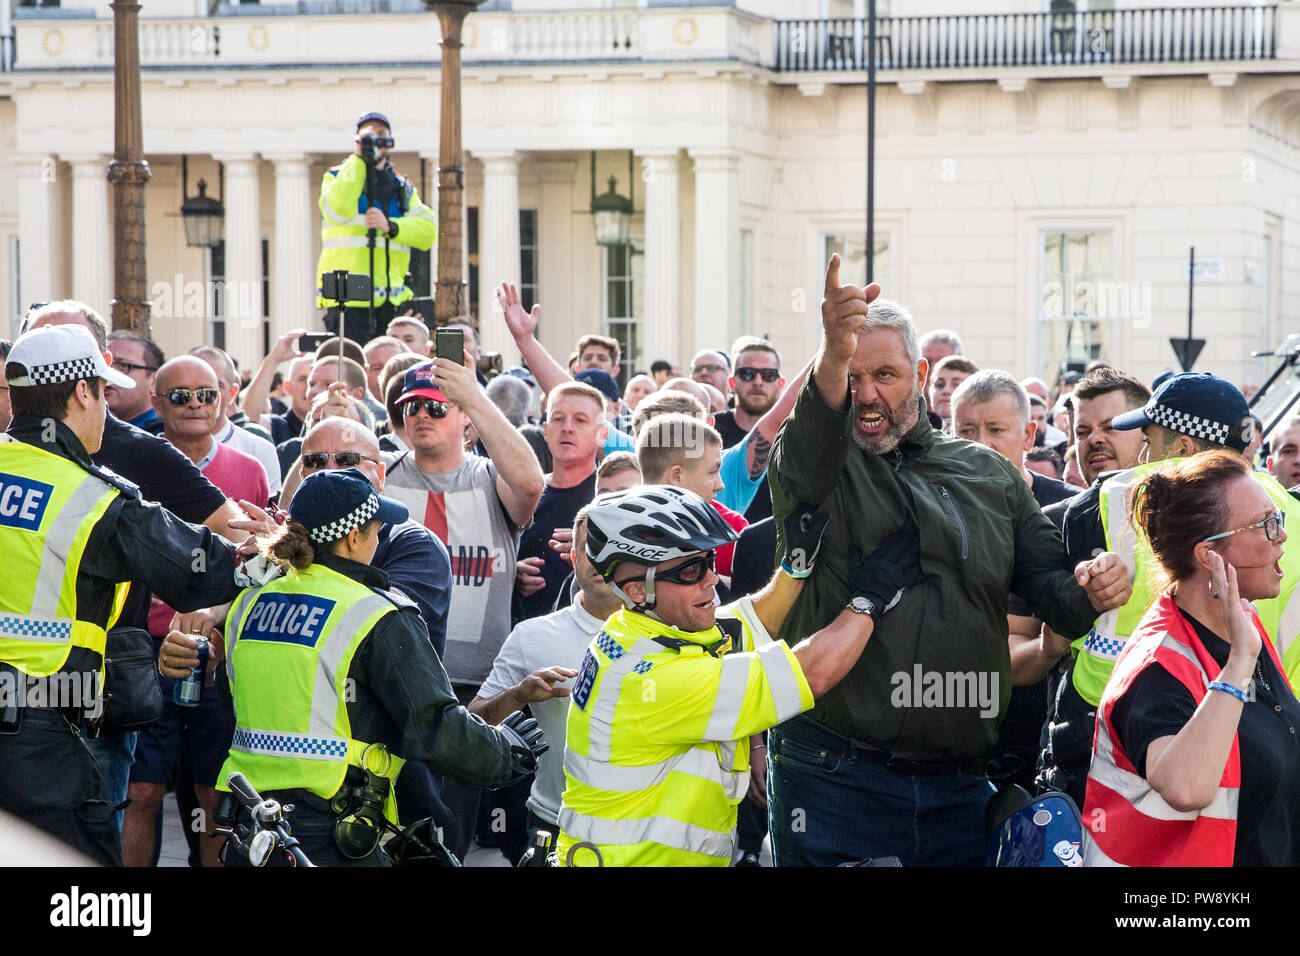 London, UK. 13th October, 2018. Supporters of the far-right Democratic Football Lads Alliance (DFLA) push against a police cordon after anti-fascist groups including many women from the Feminist Anti-Fascist Assembly blocked the route of their demonstration through London. Anti-racist groups also held a Unity demonstration to coincide with the DFLA demonstration. Credit: Mark Kerrison/Alamy Live News Stock Photo